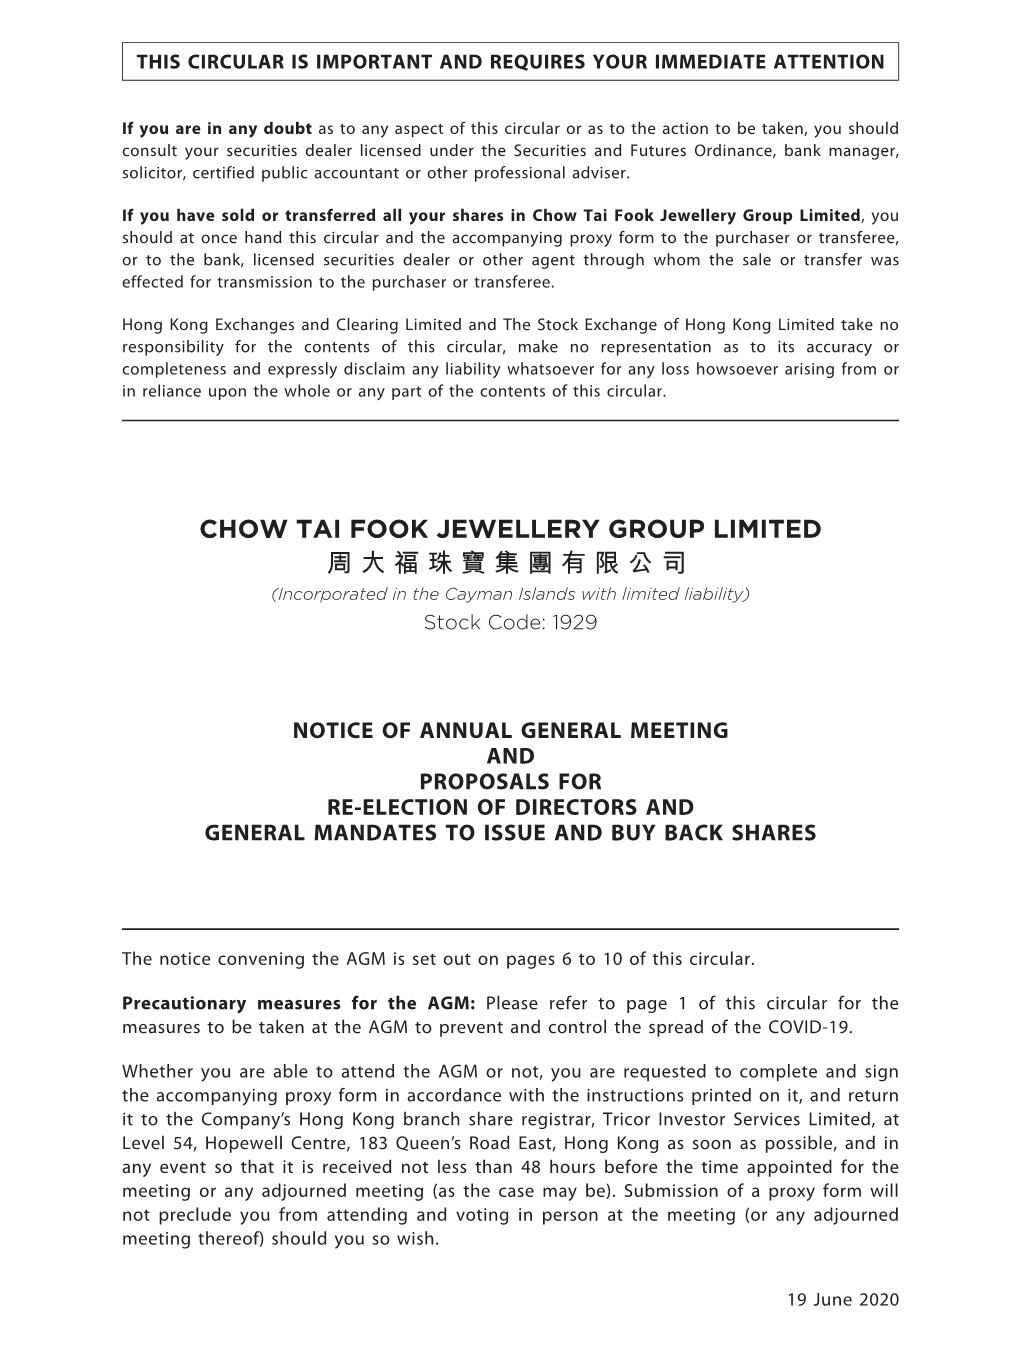 Chow Tai Fook Jewellery Group Limited